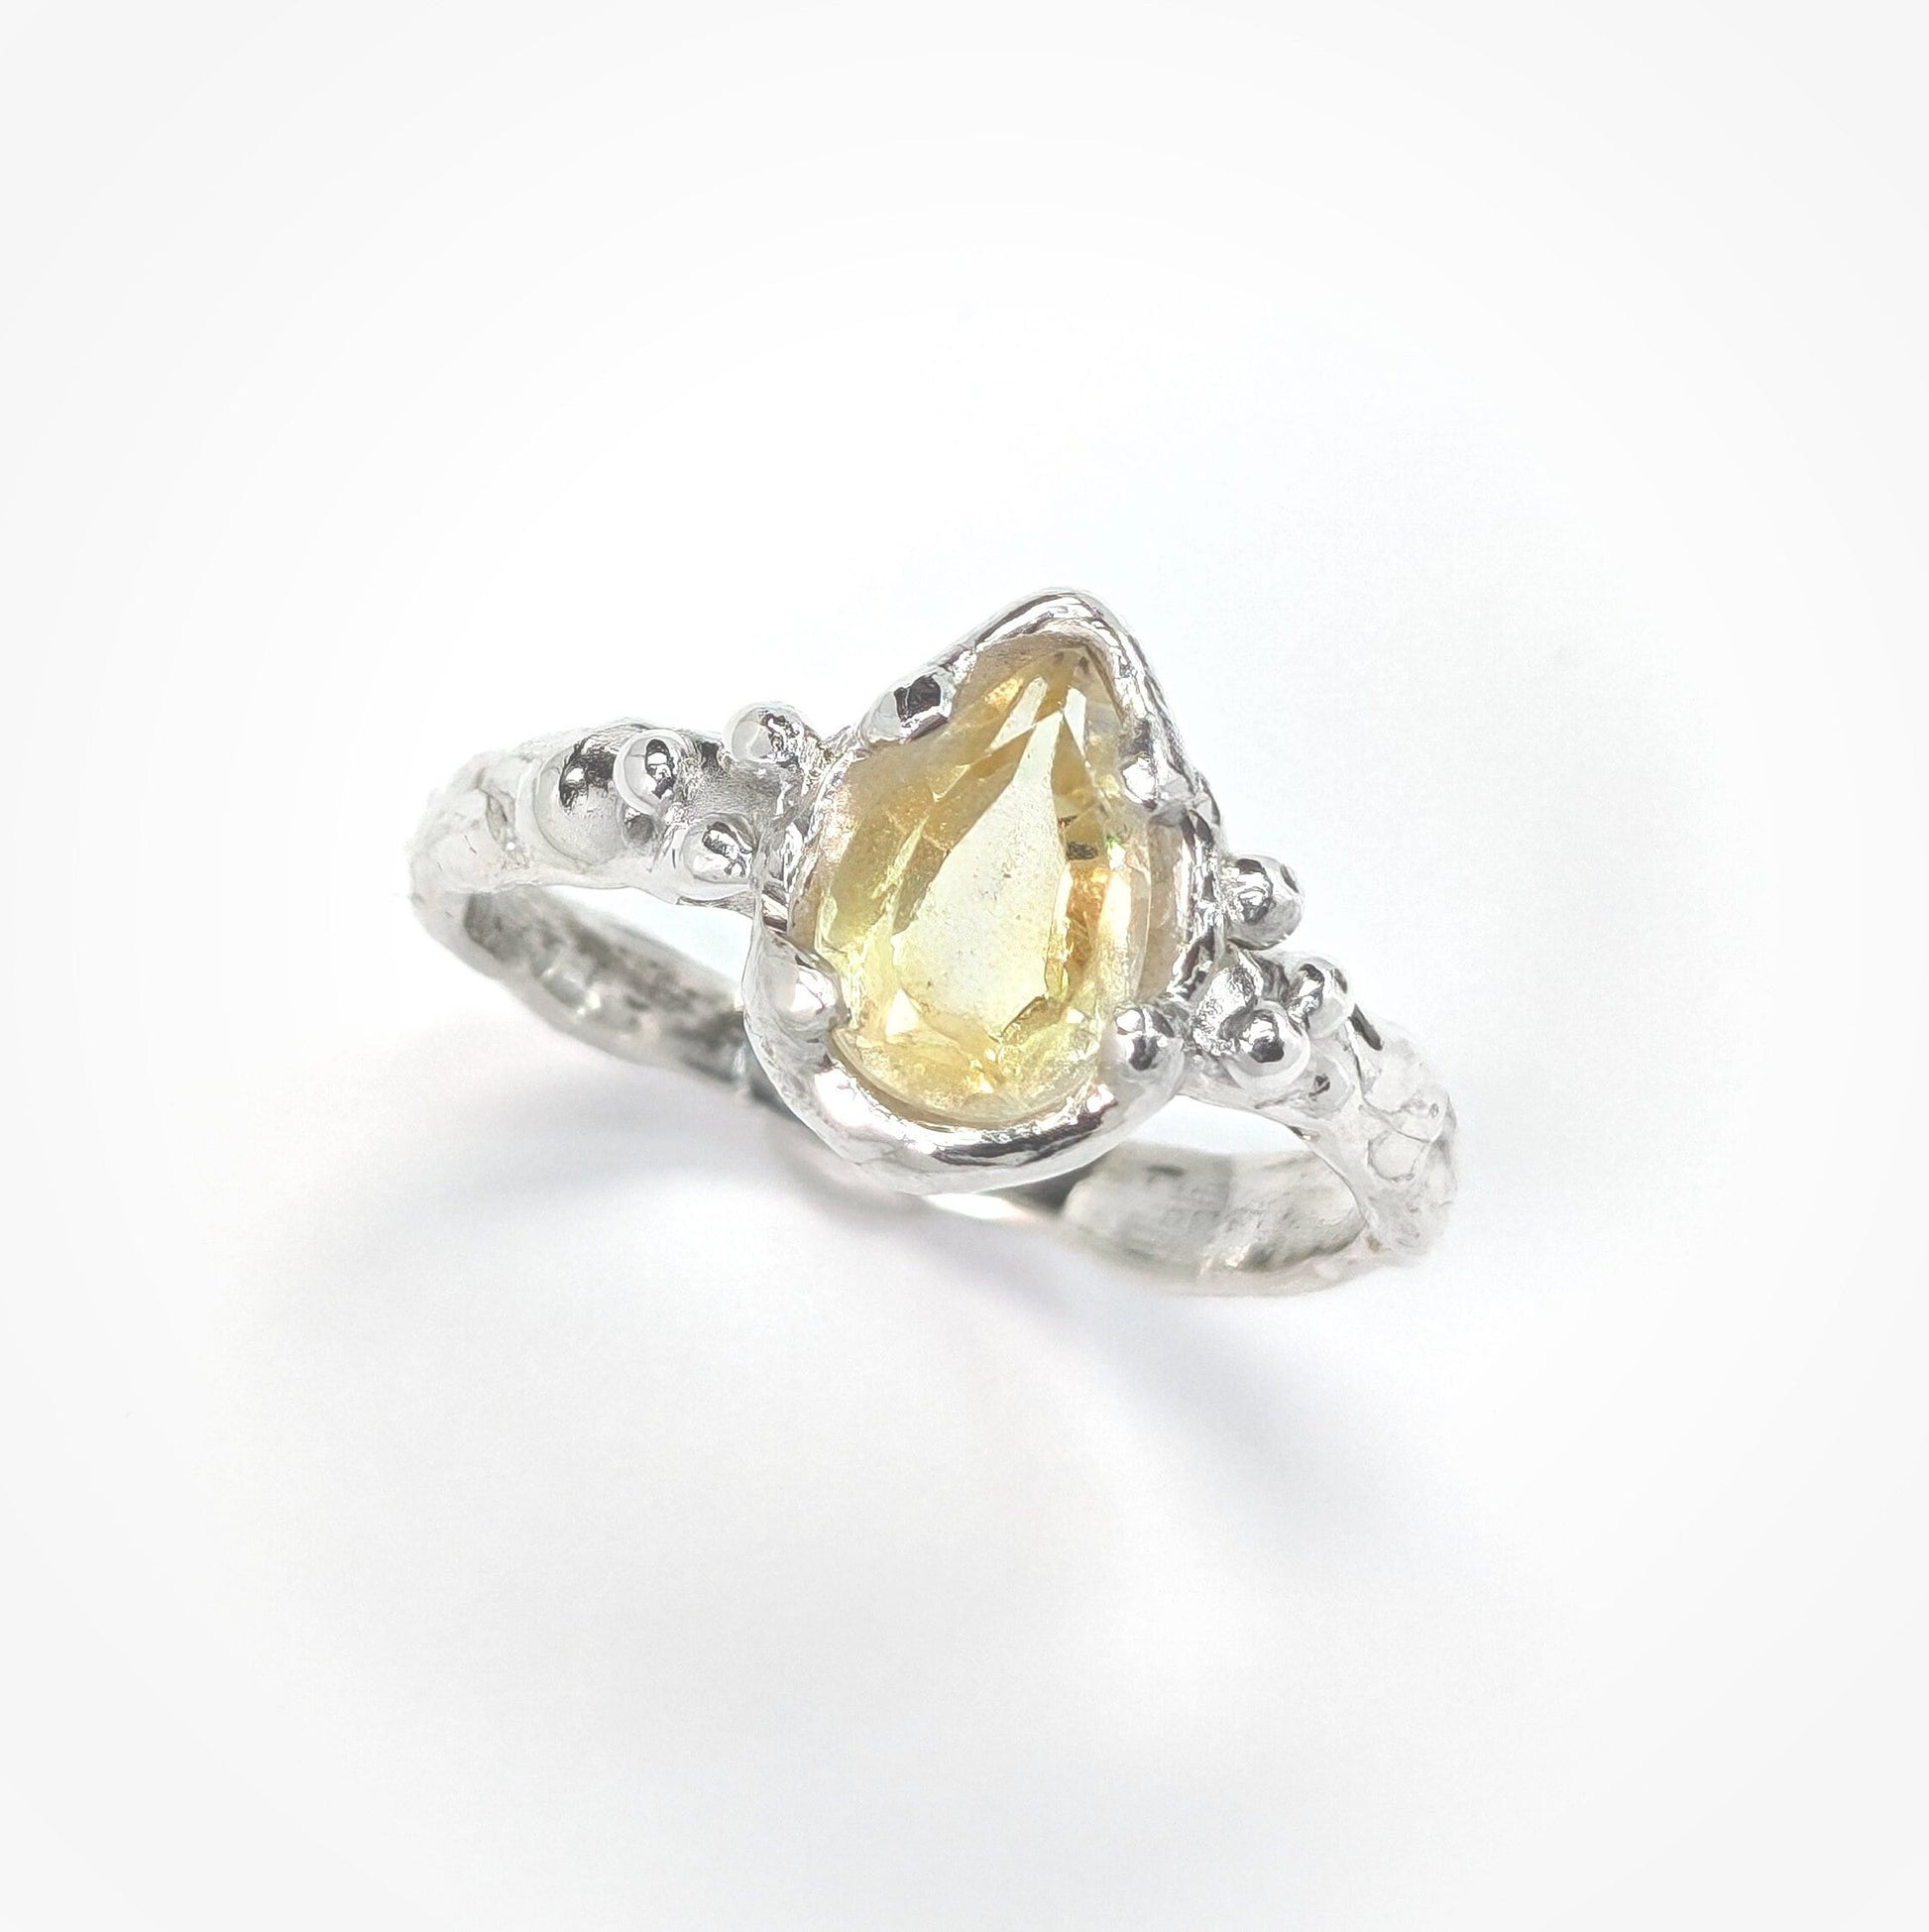 Large Pear shape Citrine set by prongs on a Solid Sterling Silver Molten textured band